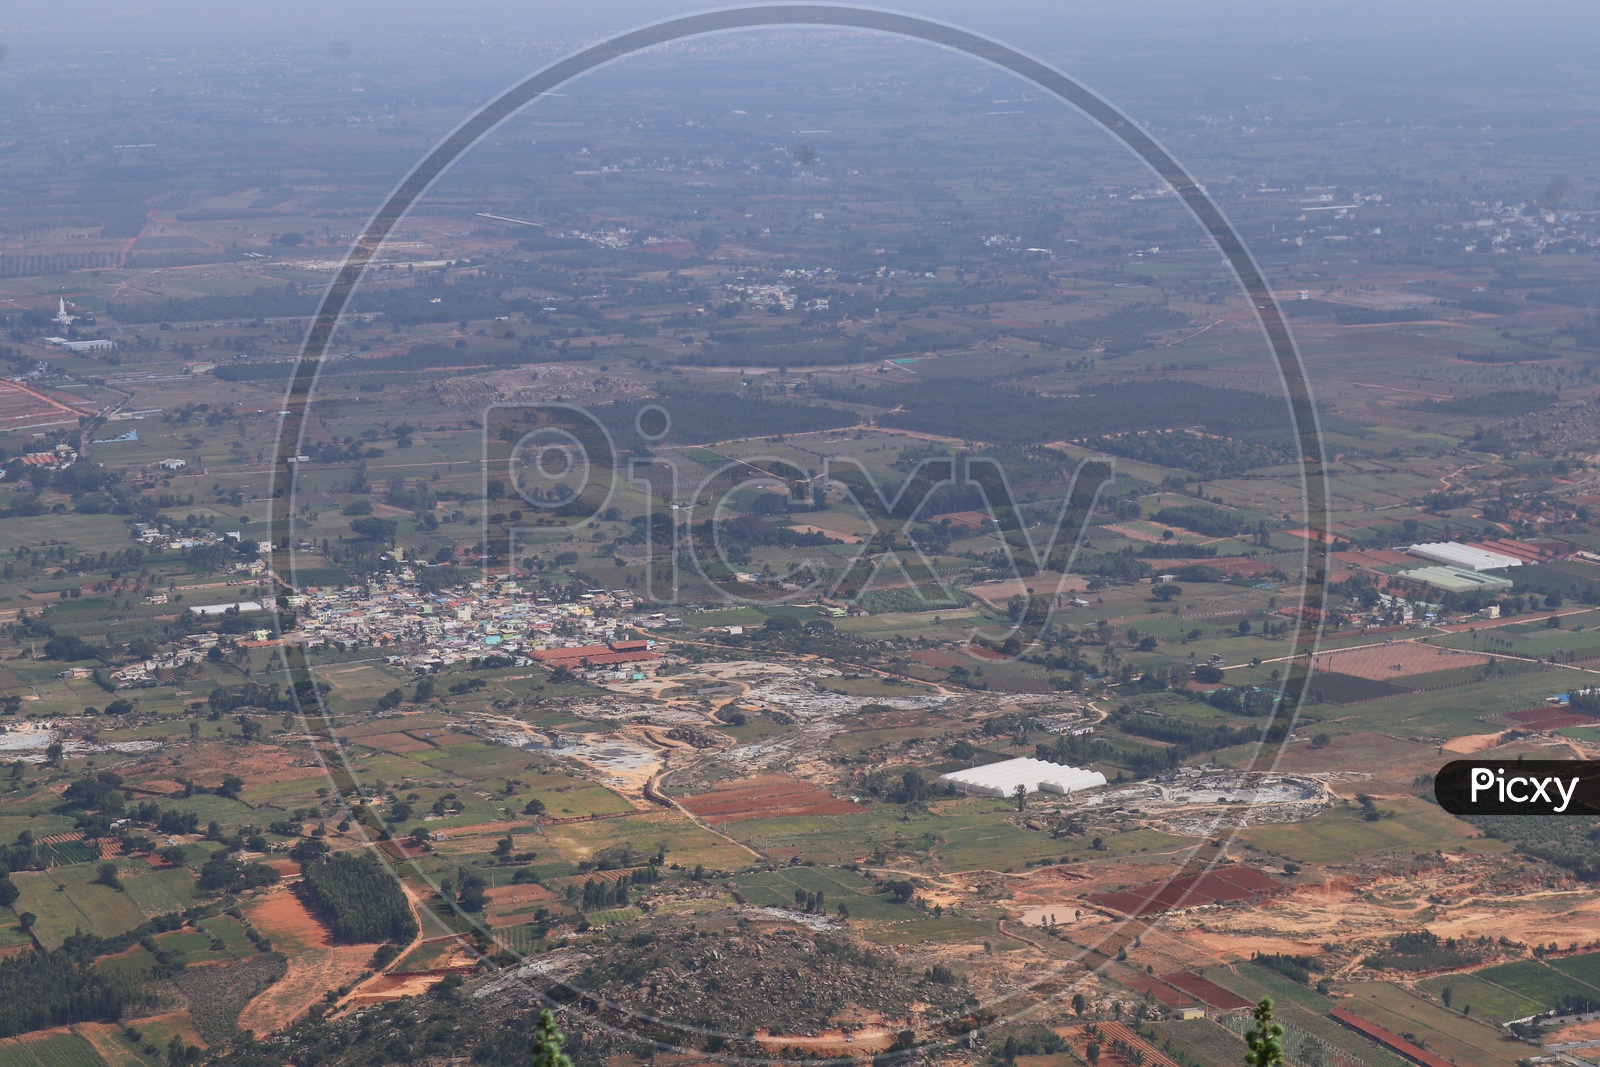 View of the terrain from Nandi hills